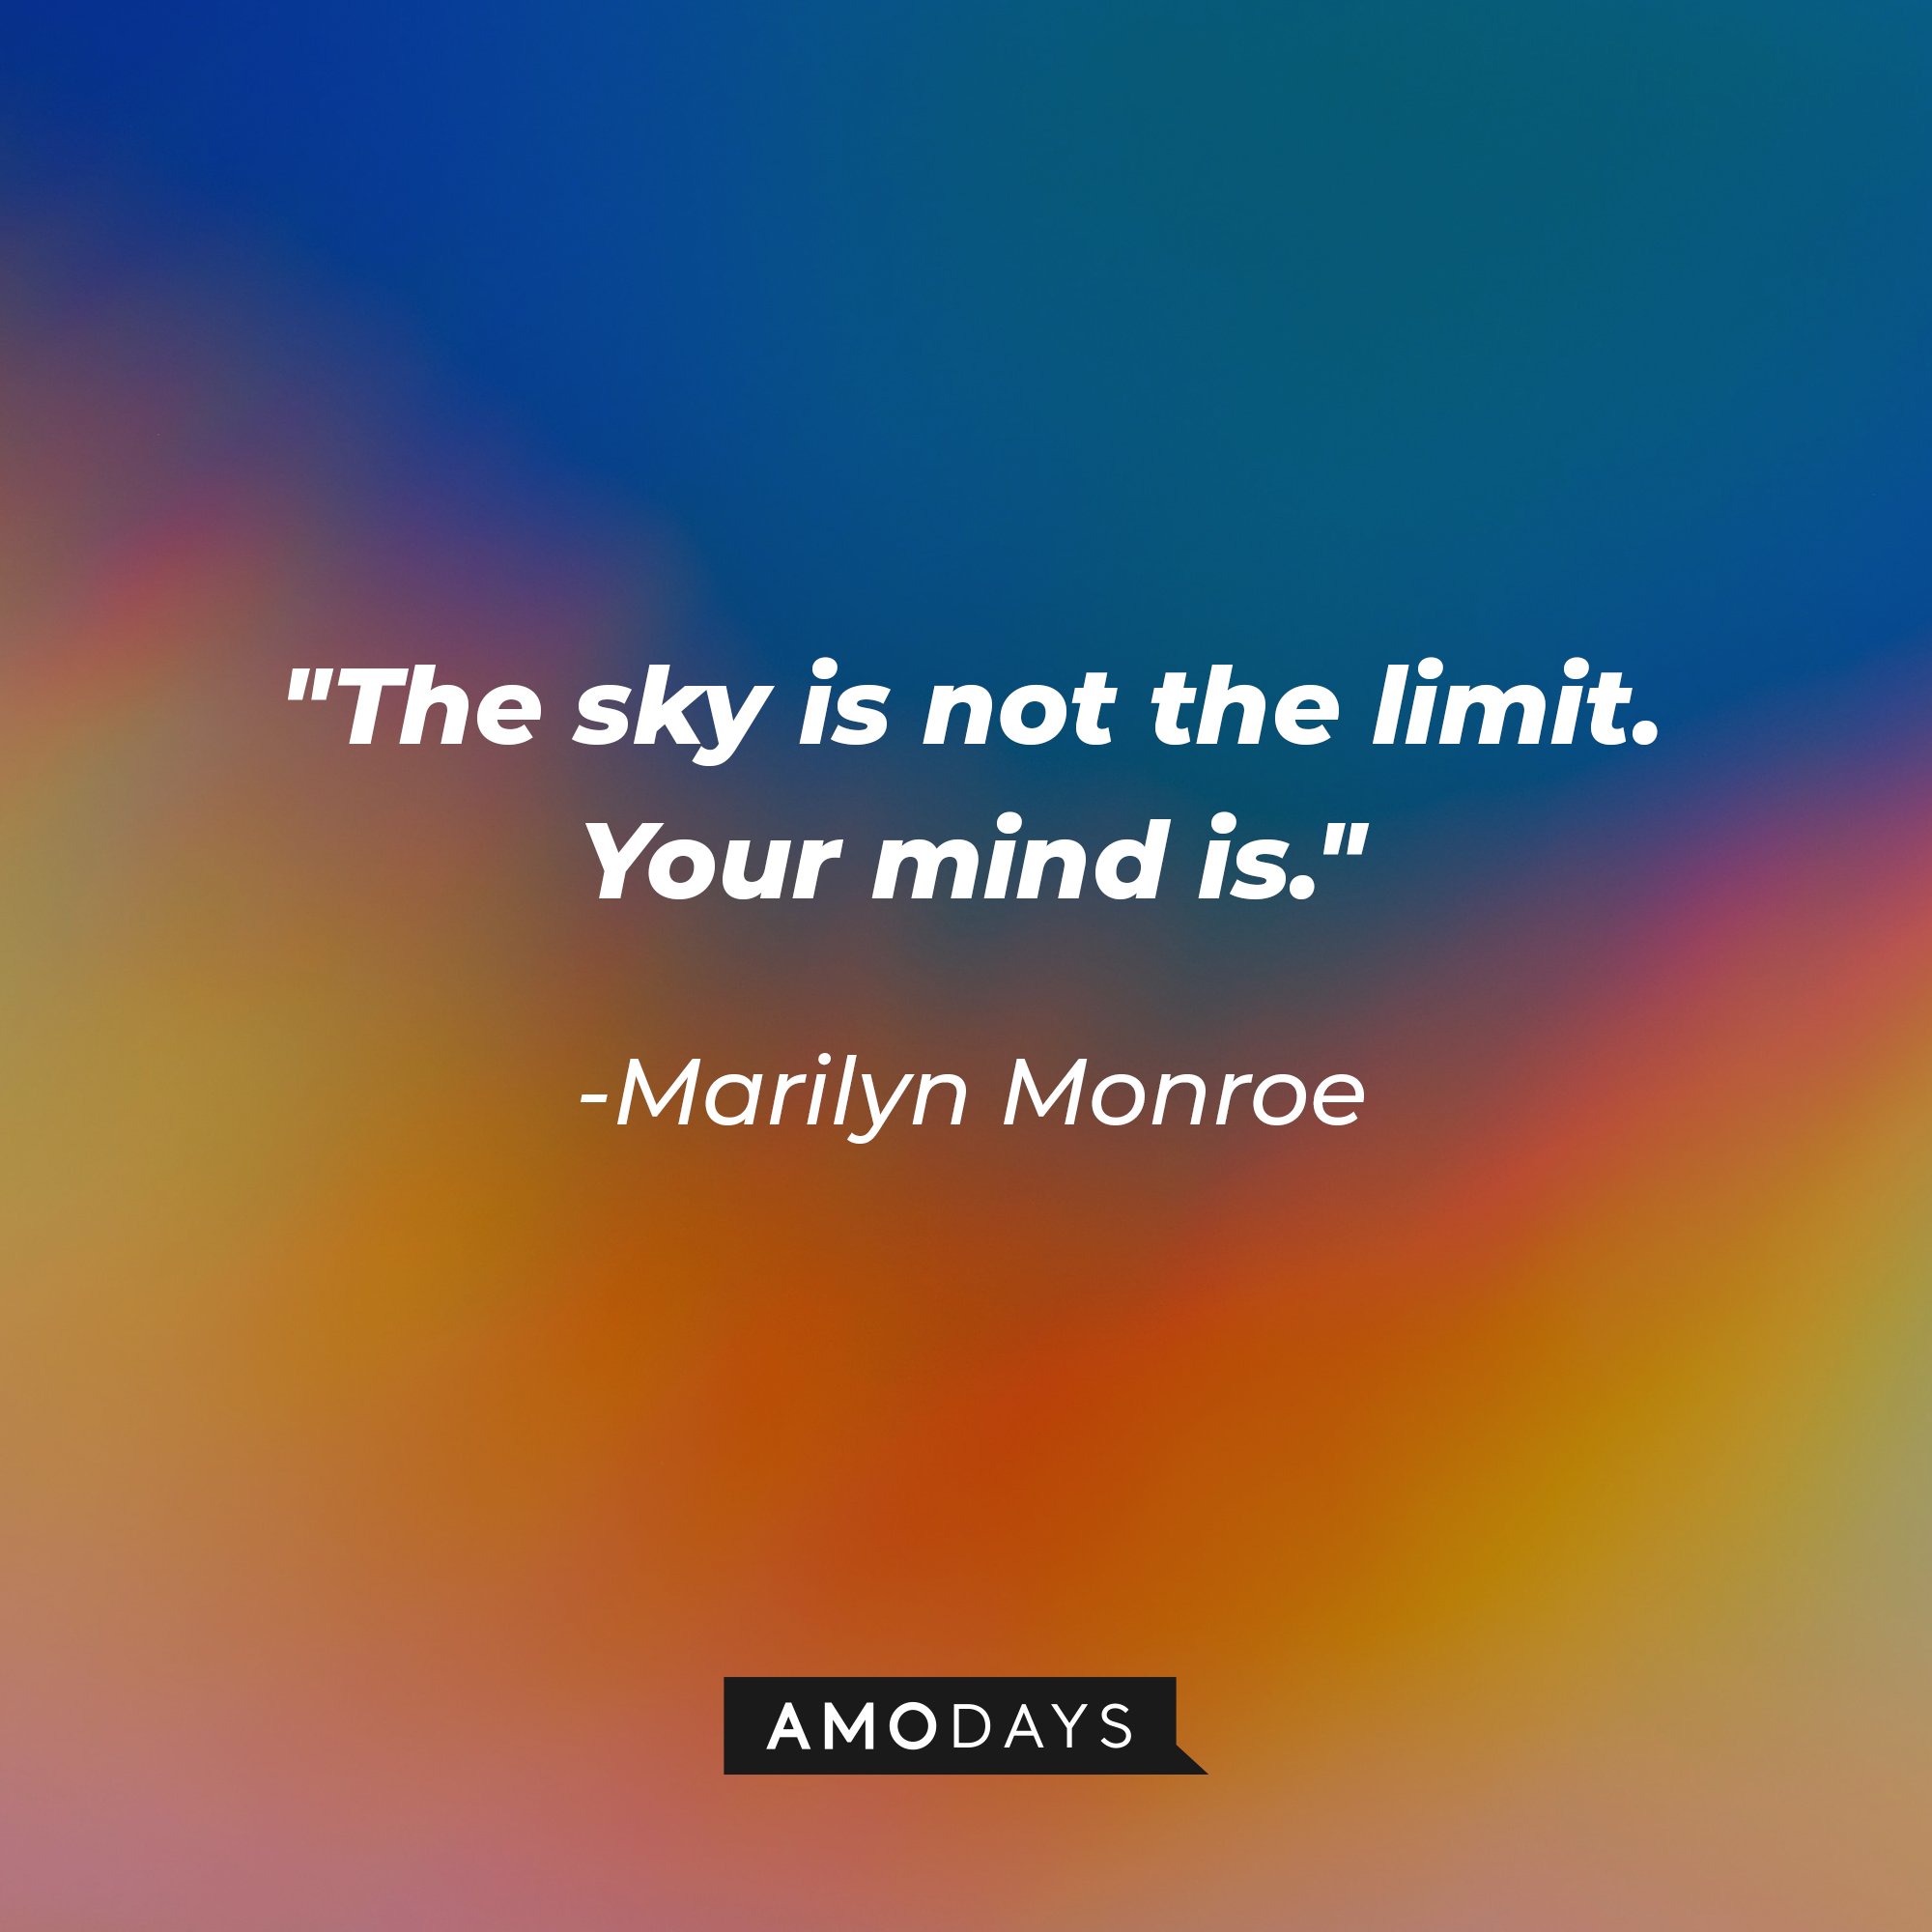 Marilyn Monroe’s quote: "The sky is not the limit. Your mind is." | Image: AmoDays